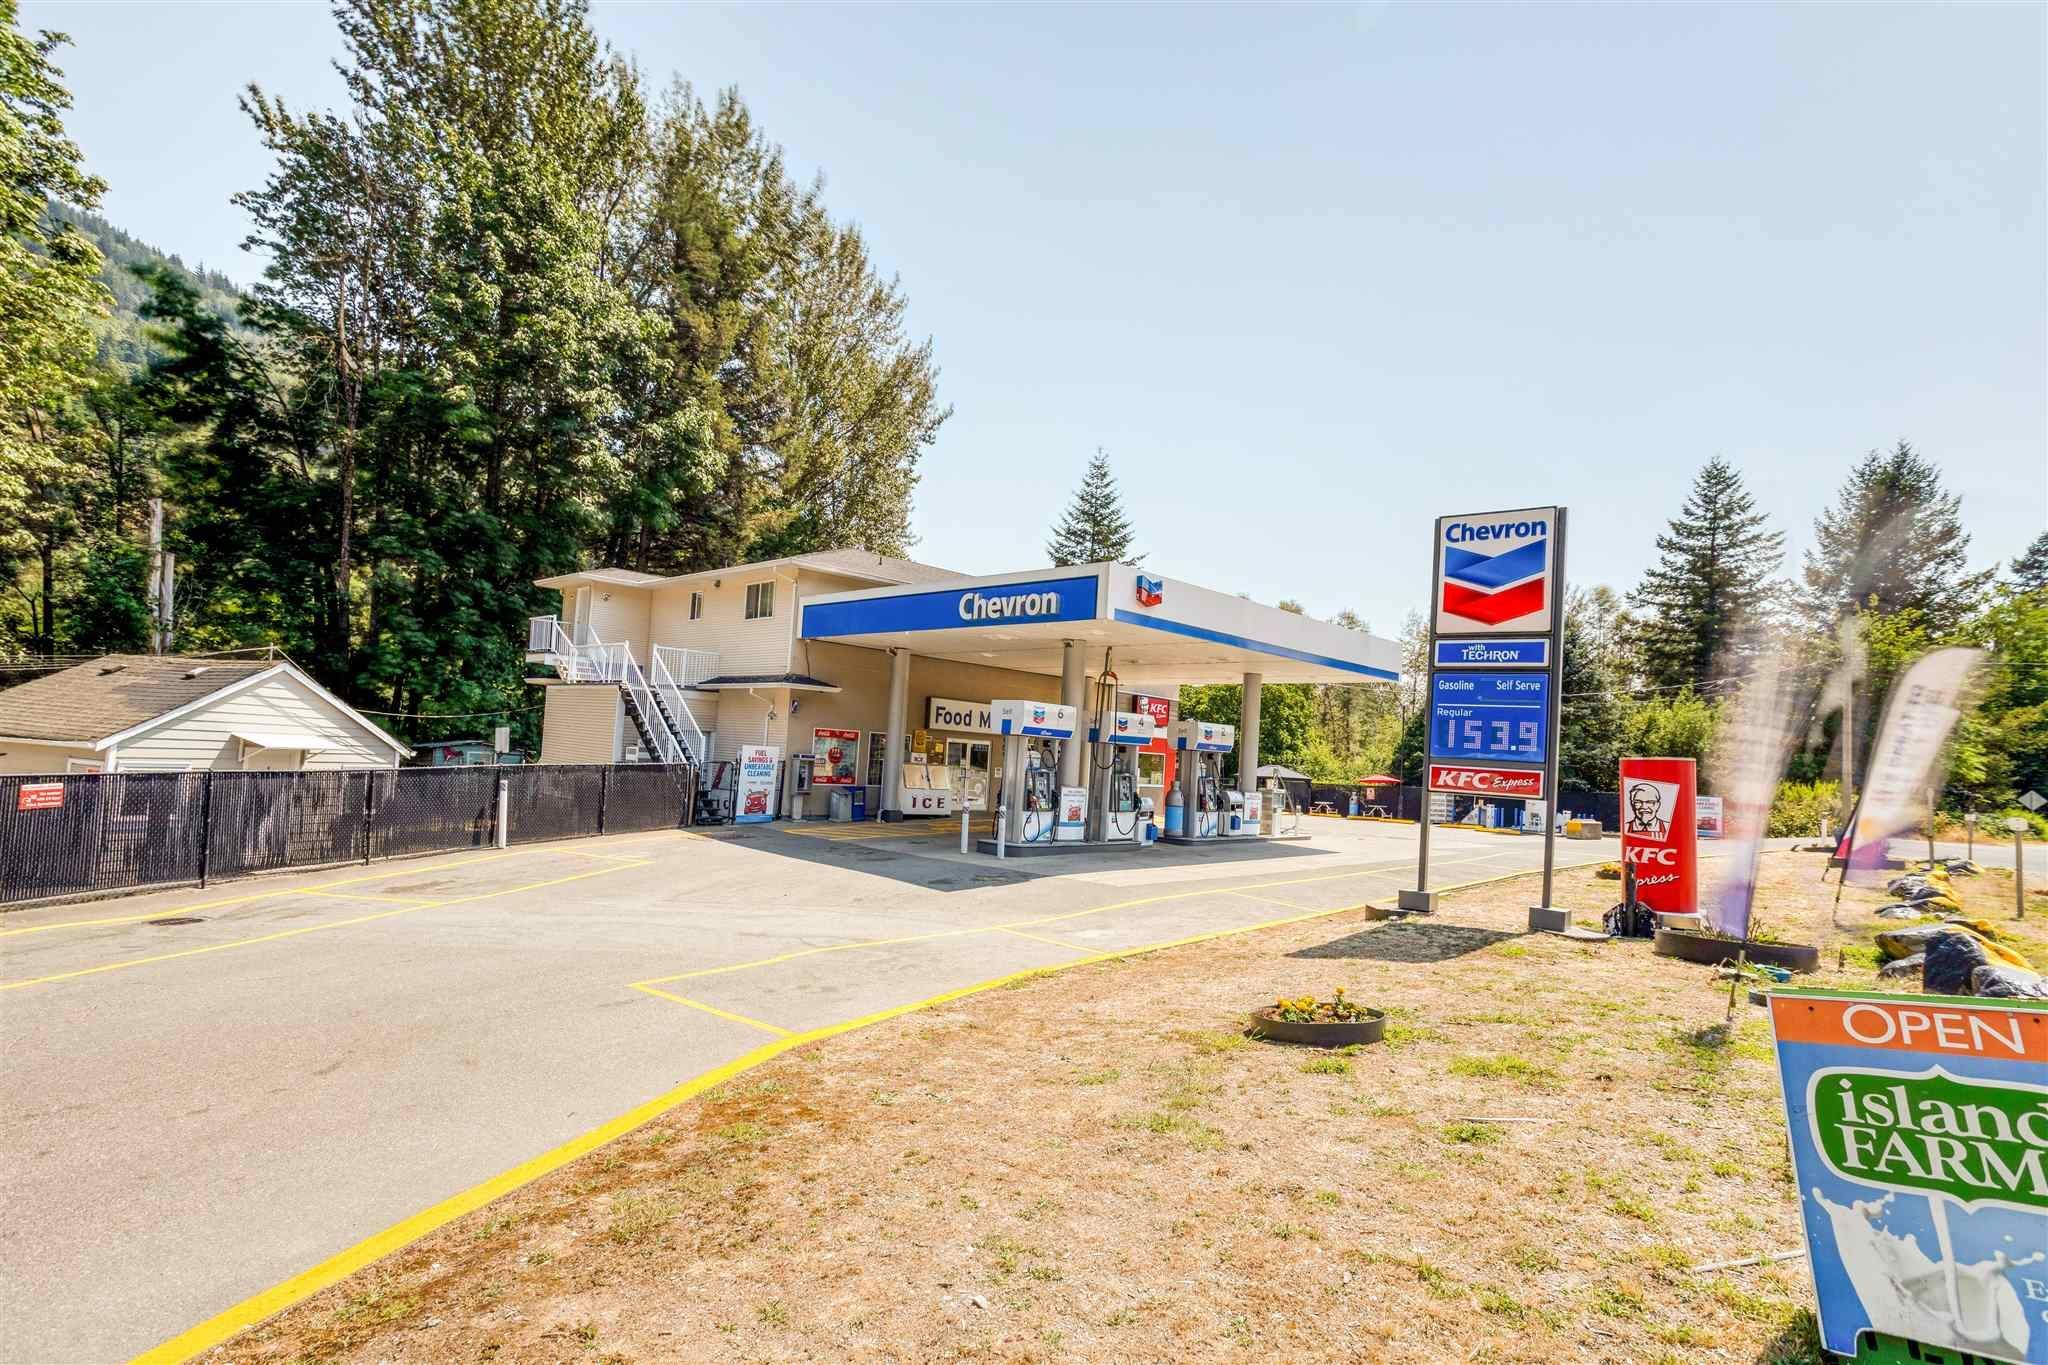 Main Photo: Gas Station with property in BC: Business with Property for sale